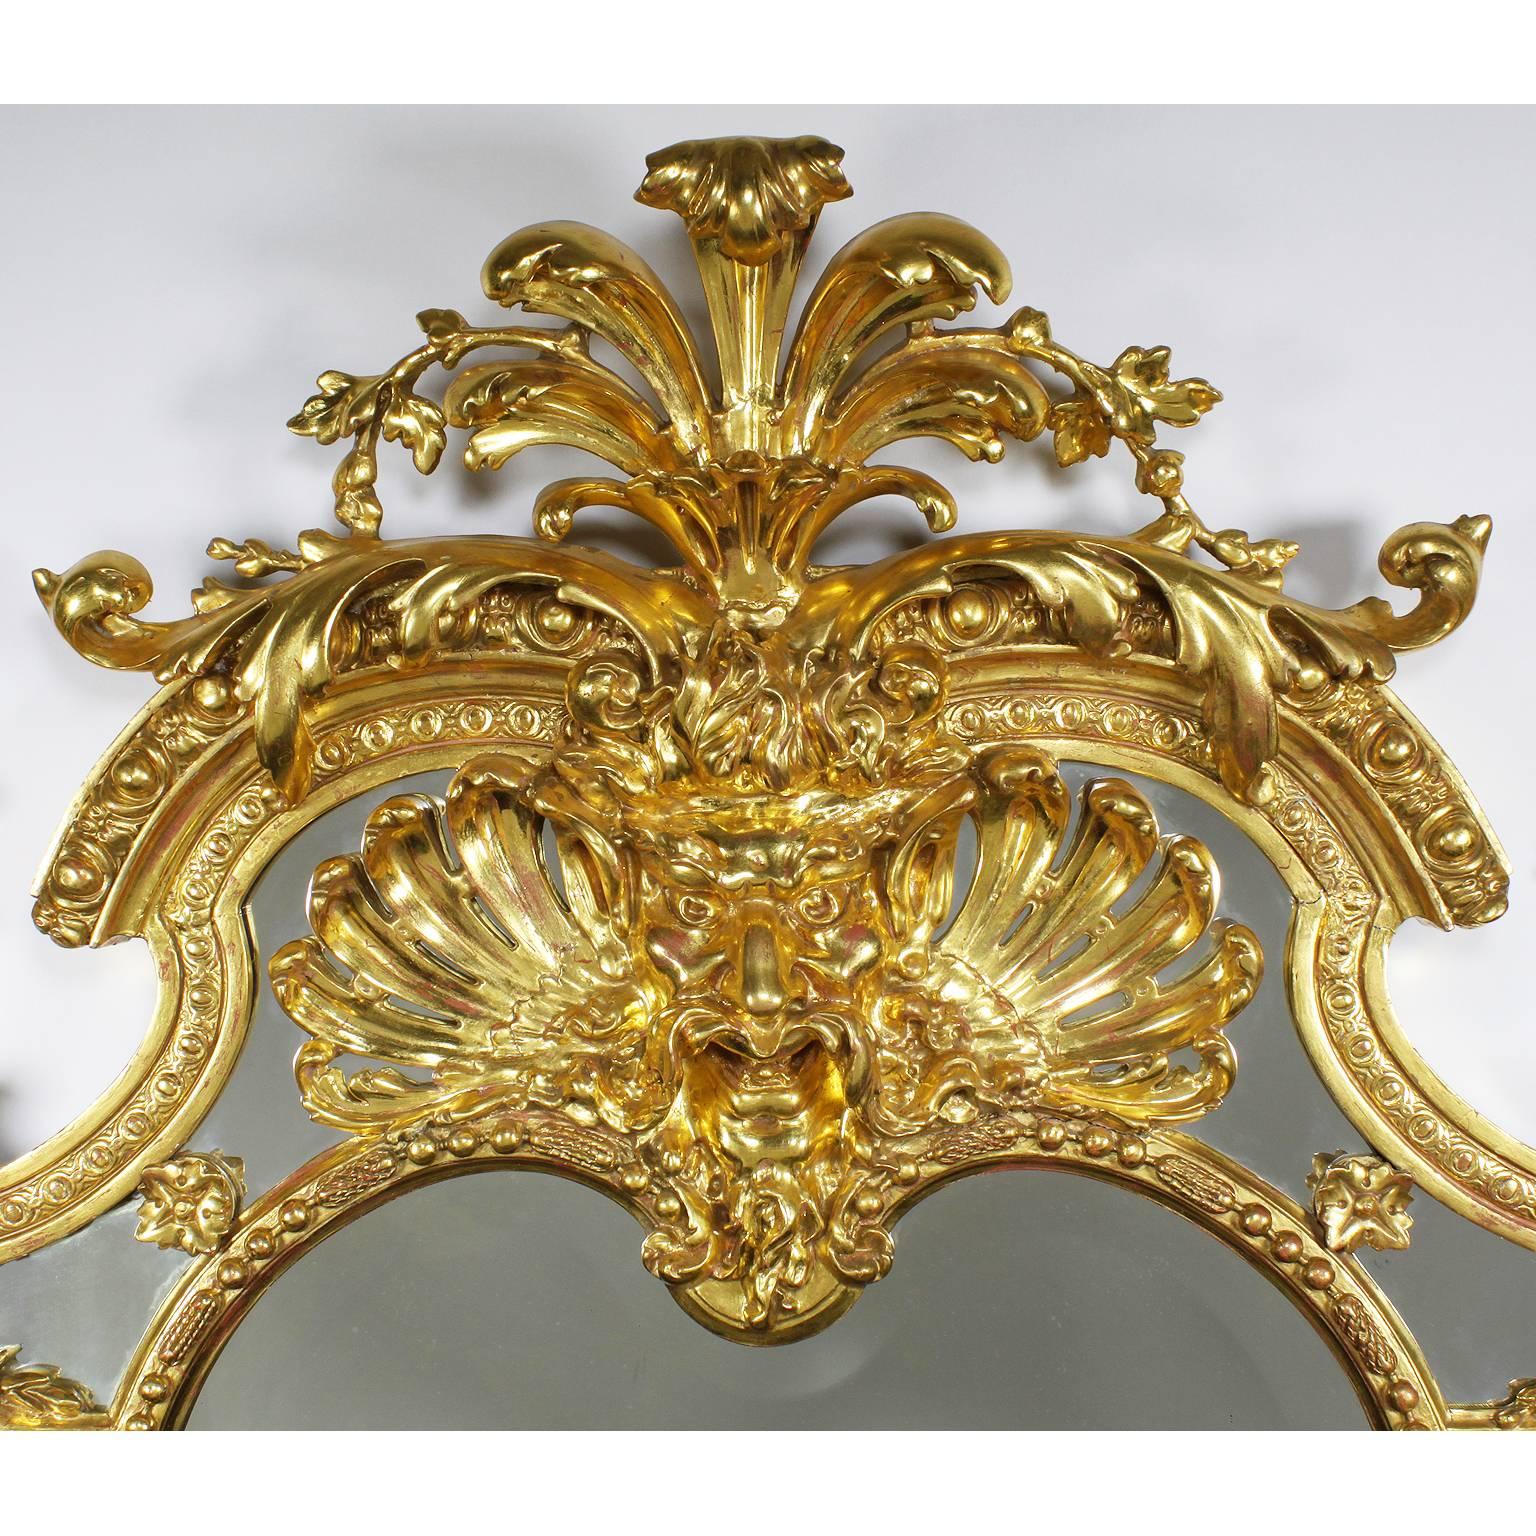 Beveled French Empire Revival 19th Century Giltwood Carved Figural Console and Mirror For Sale